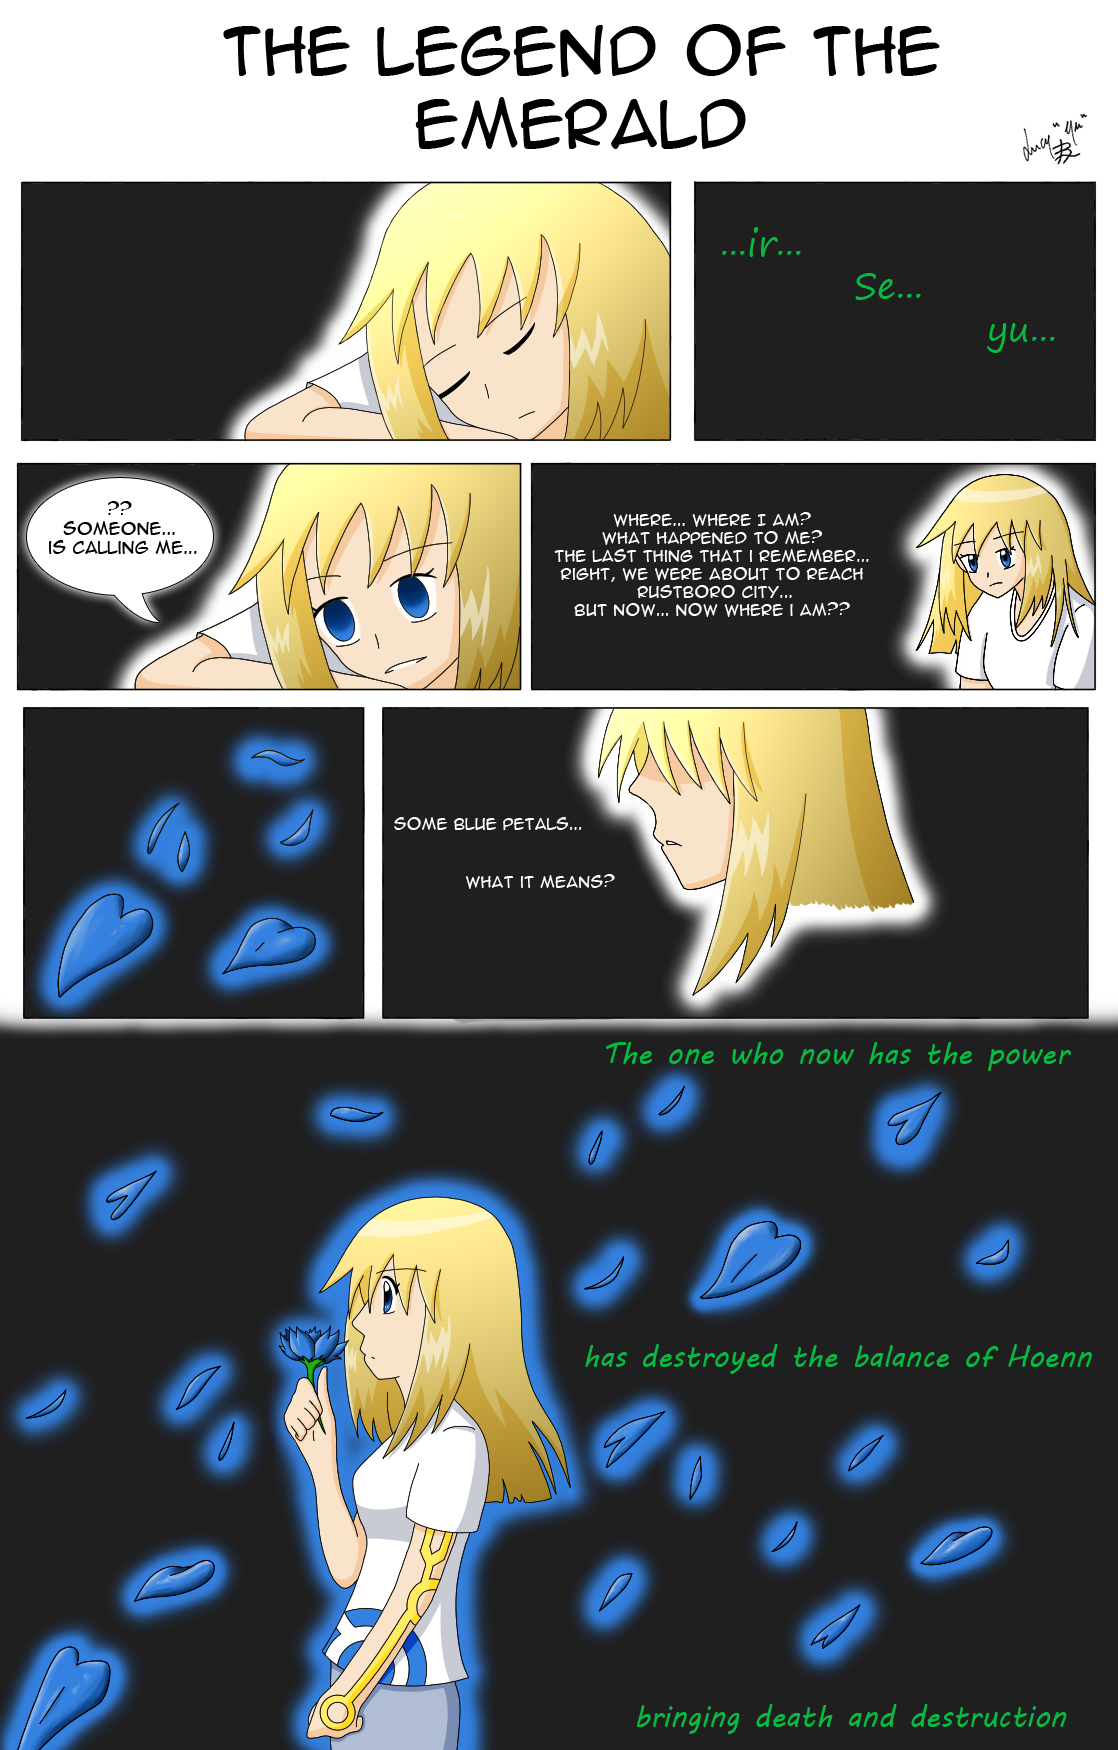 The Legend of the Emerald - Nuzlocke - Page 18 by seiryu6